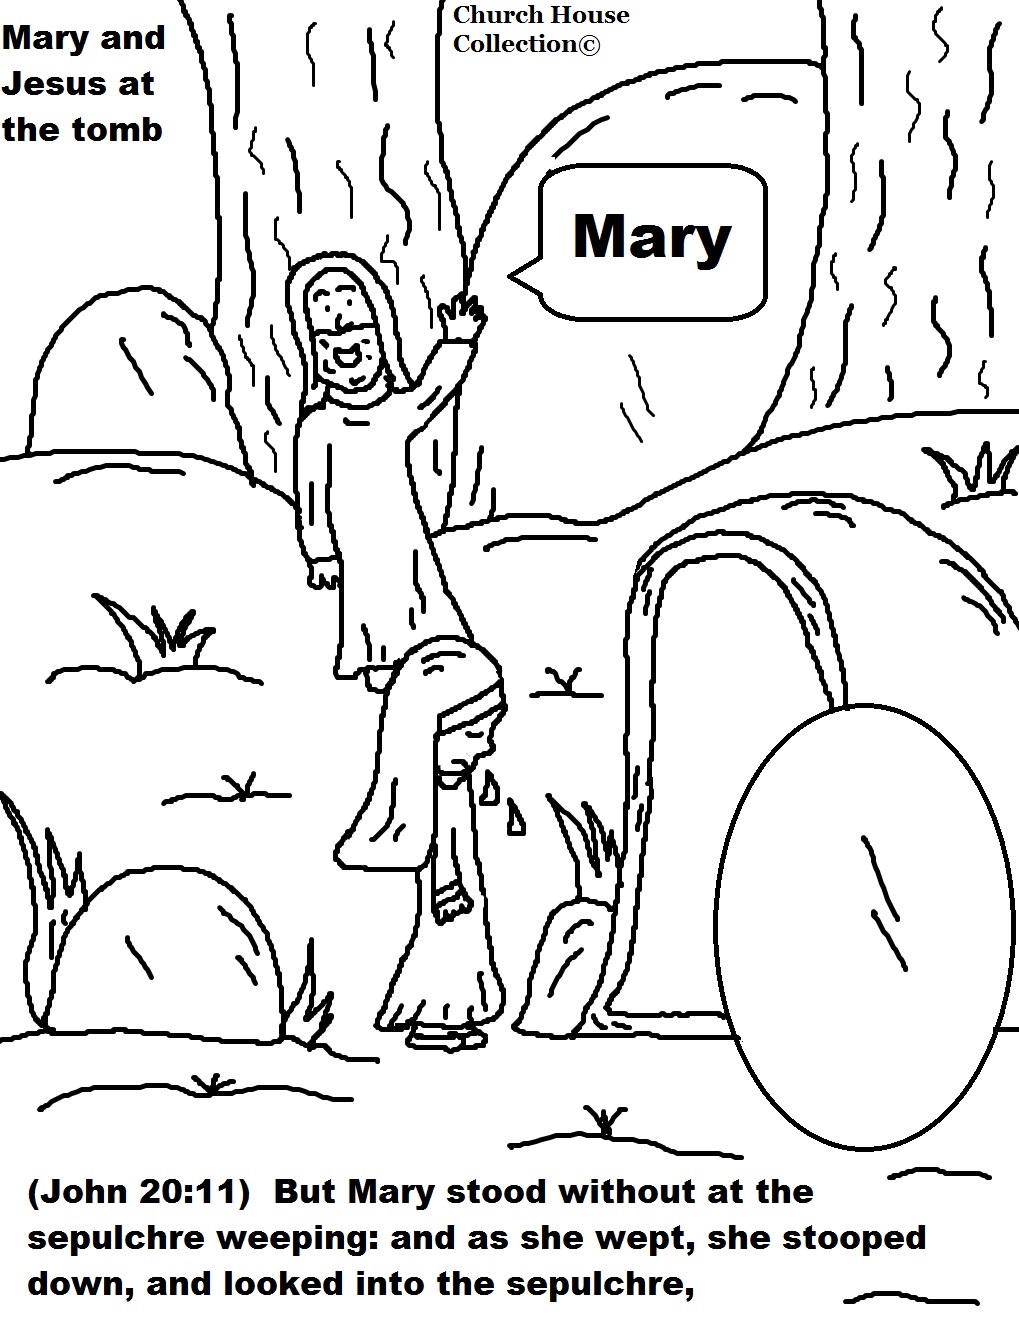 Church House Collection Blog: Easter Jesus Resurrection Coloring Pages